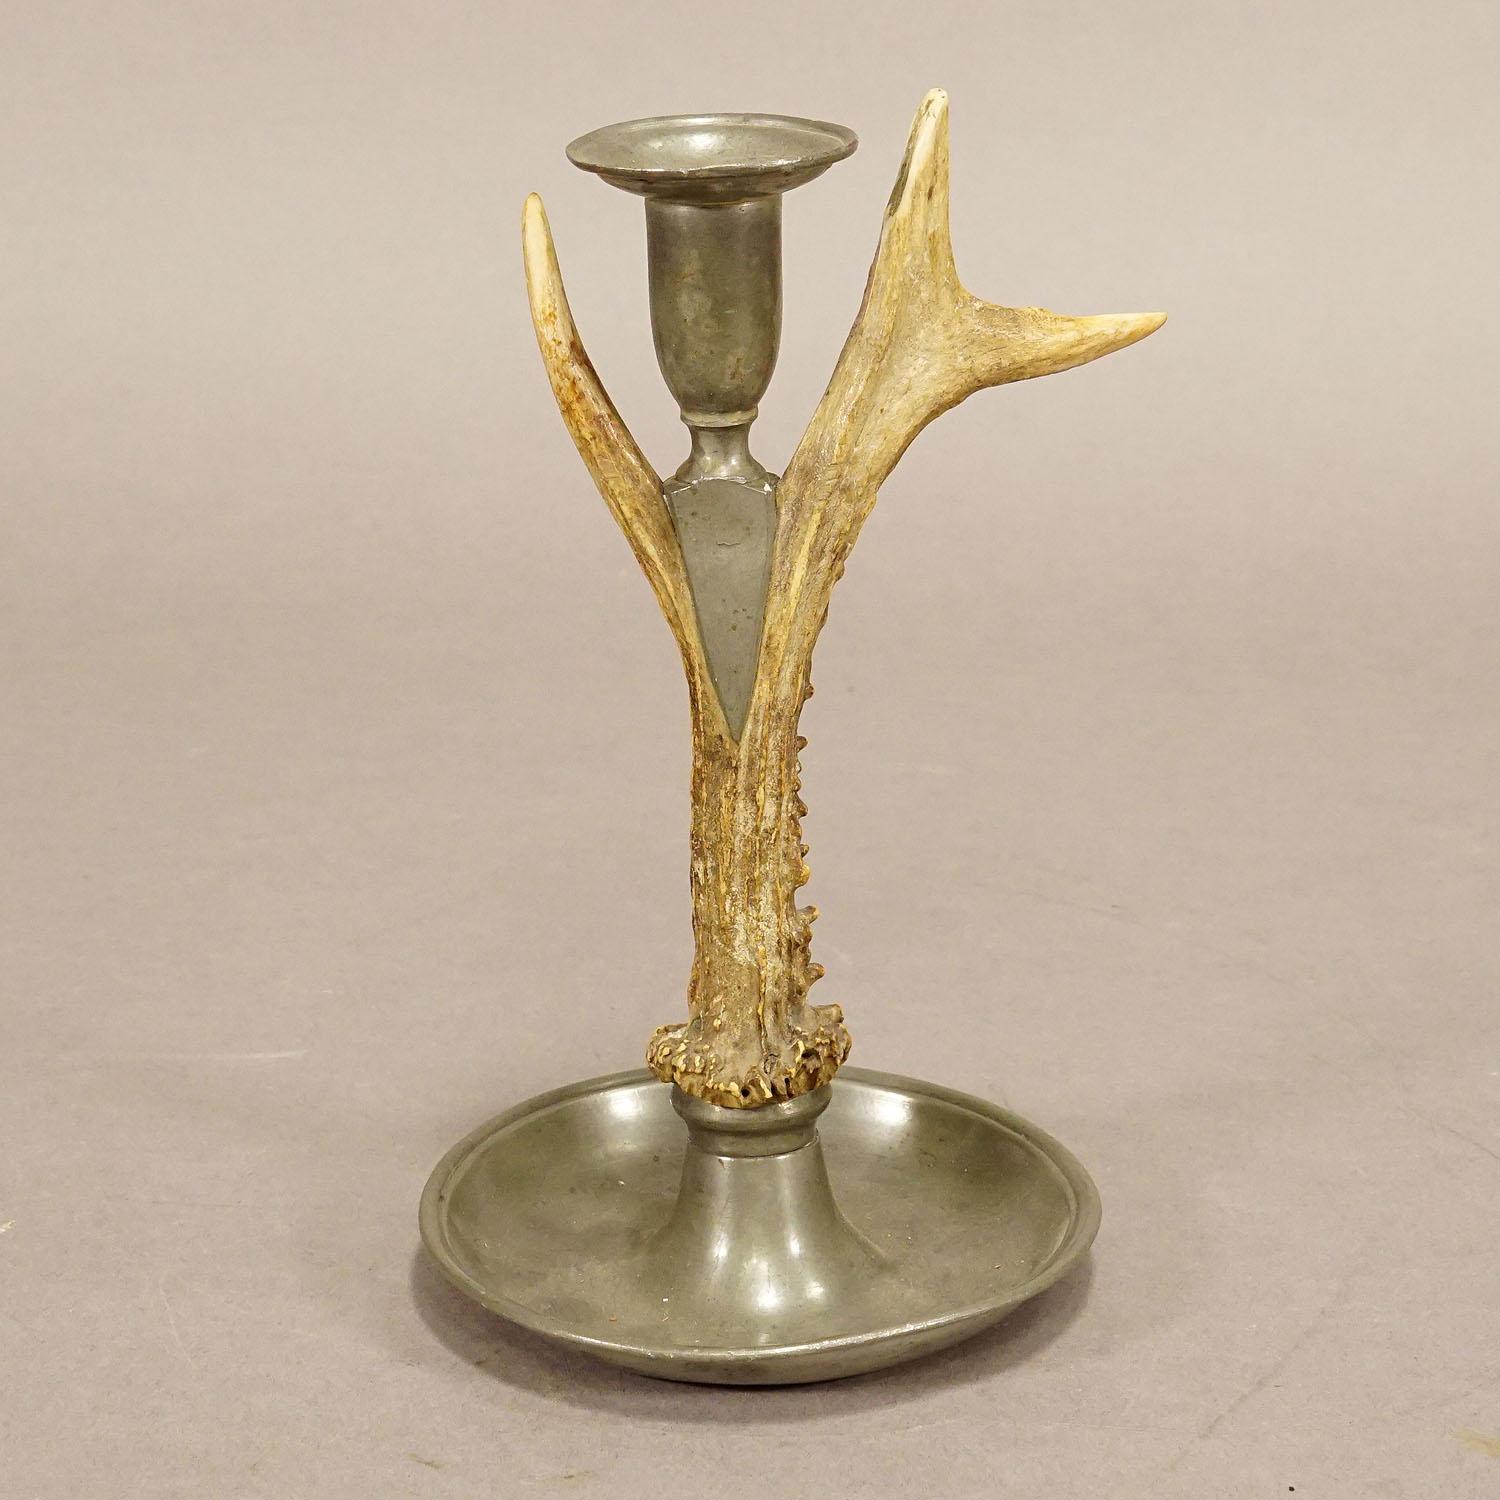 Rustic Black Forest Candle Holder with Pewter Base and Spout, Germany, circa 1860s For Sale